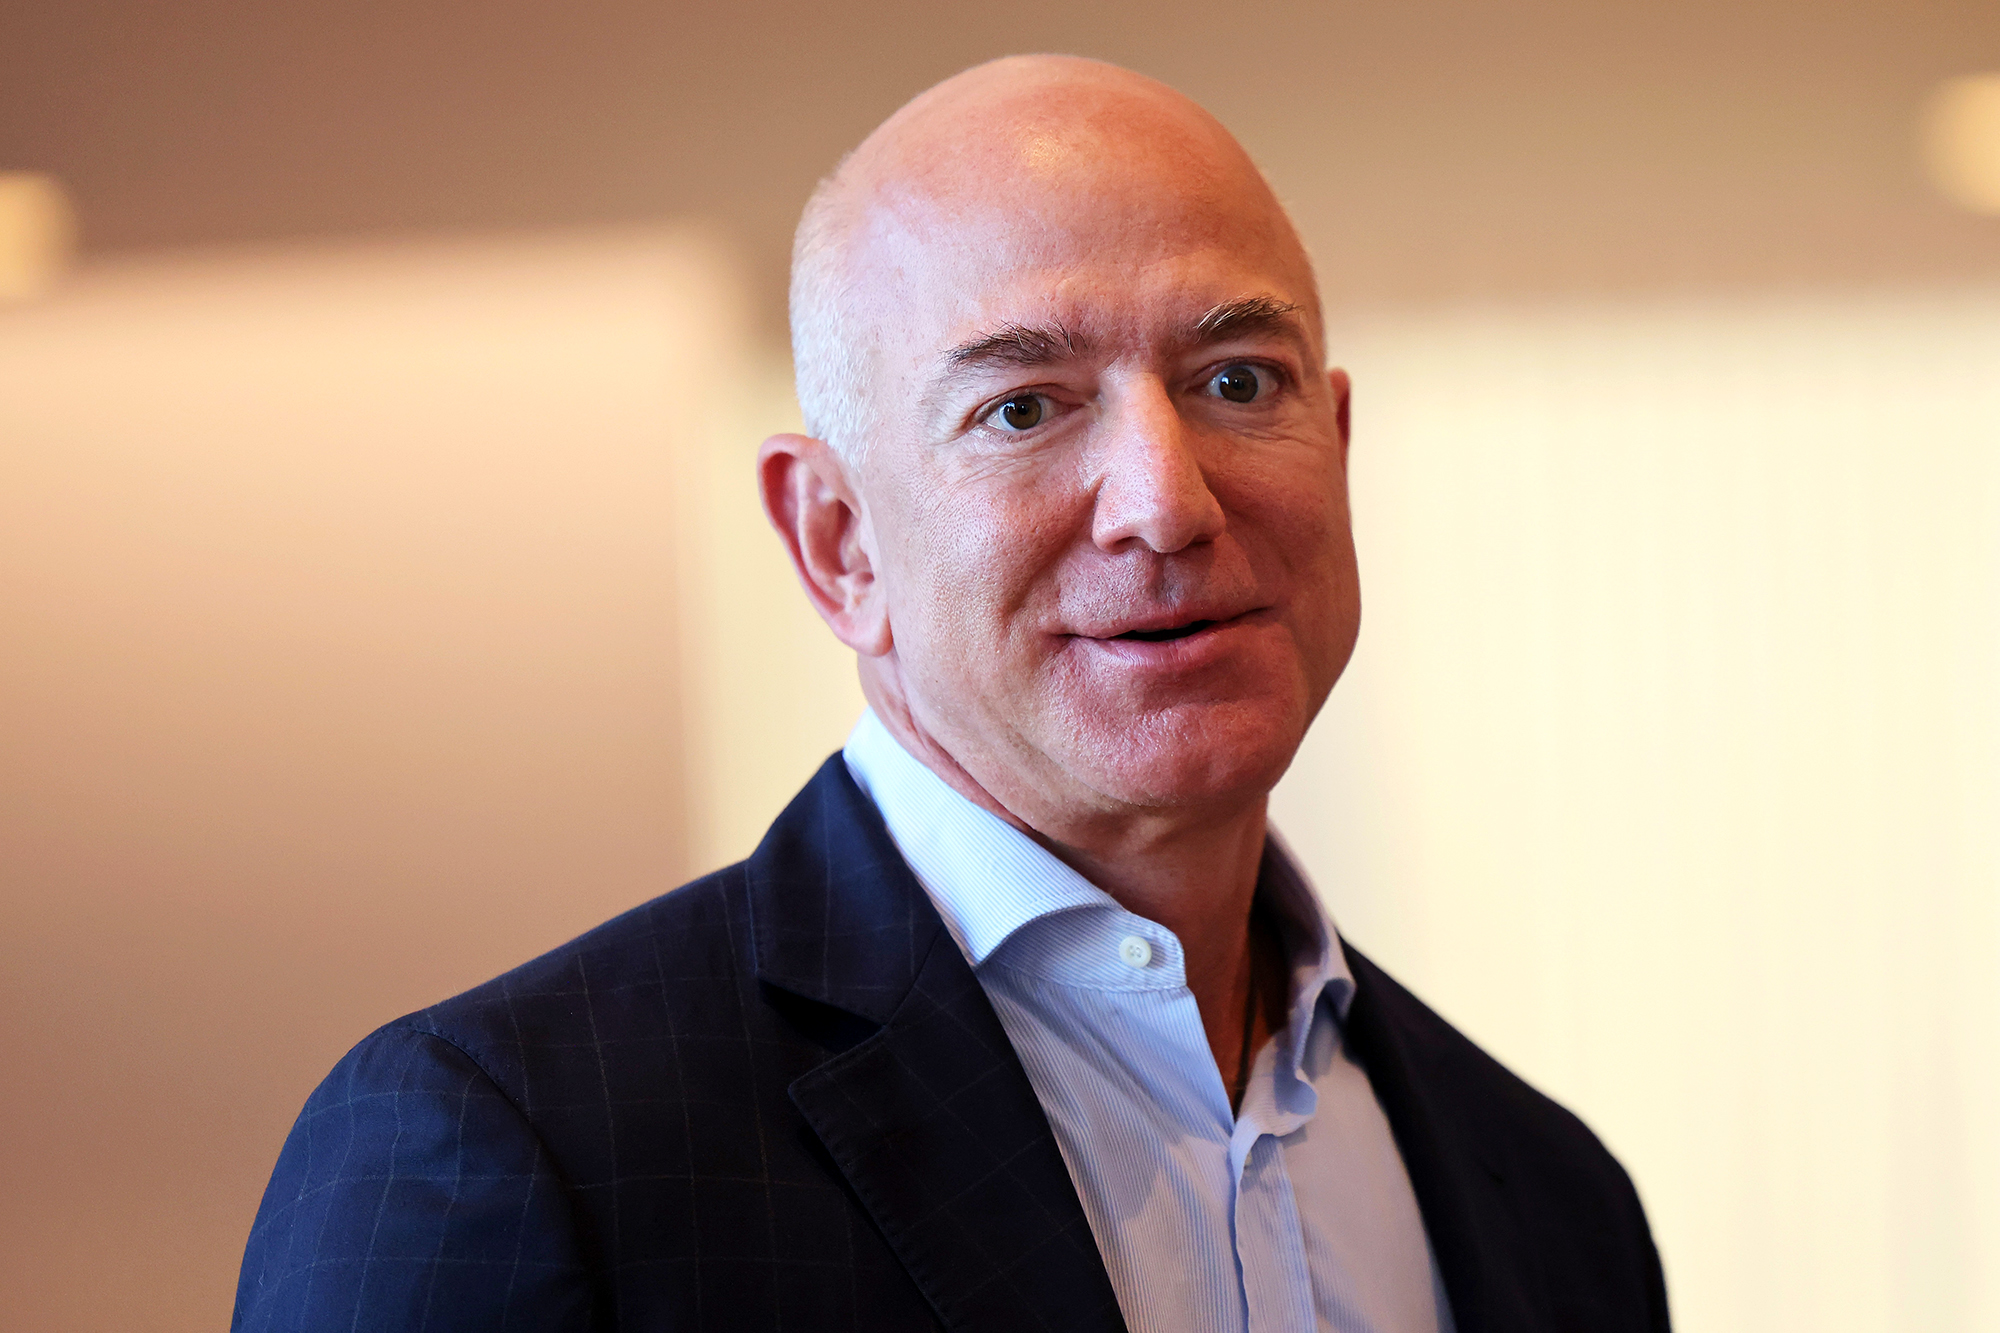 PHOTO: Amazon founder Jeff Bezos attends a meeting in New York, Sept. 20, 2021.